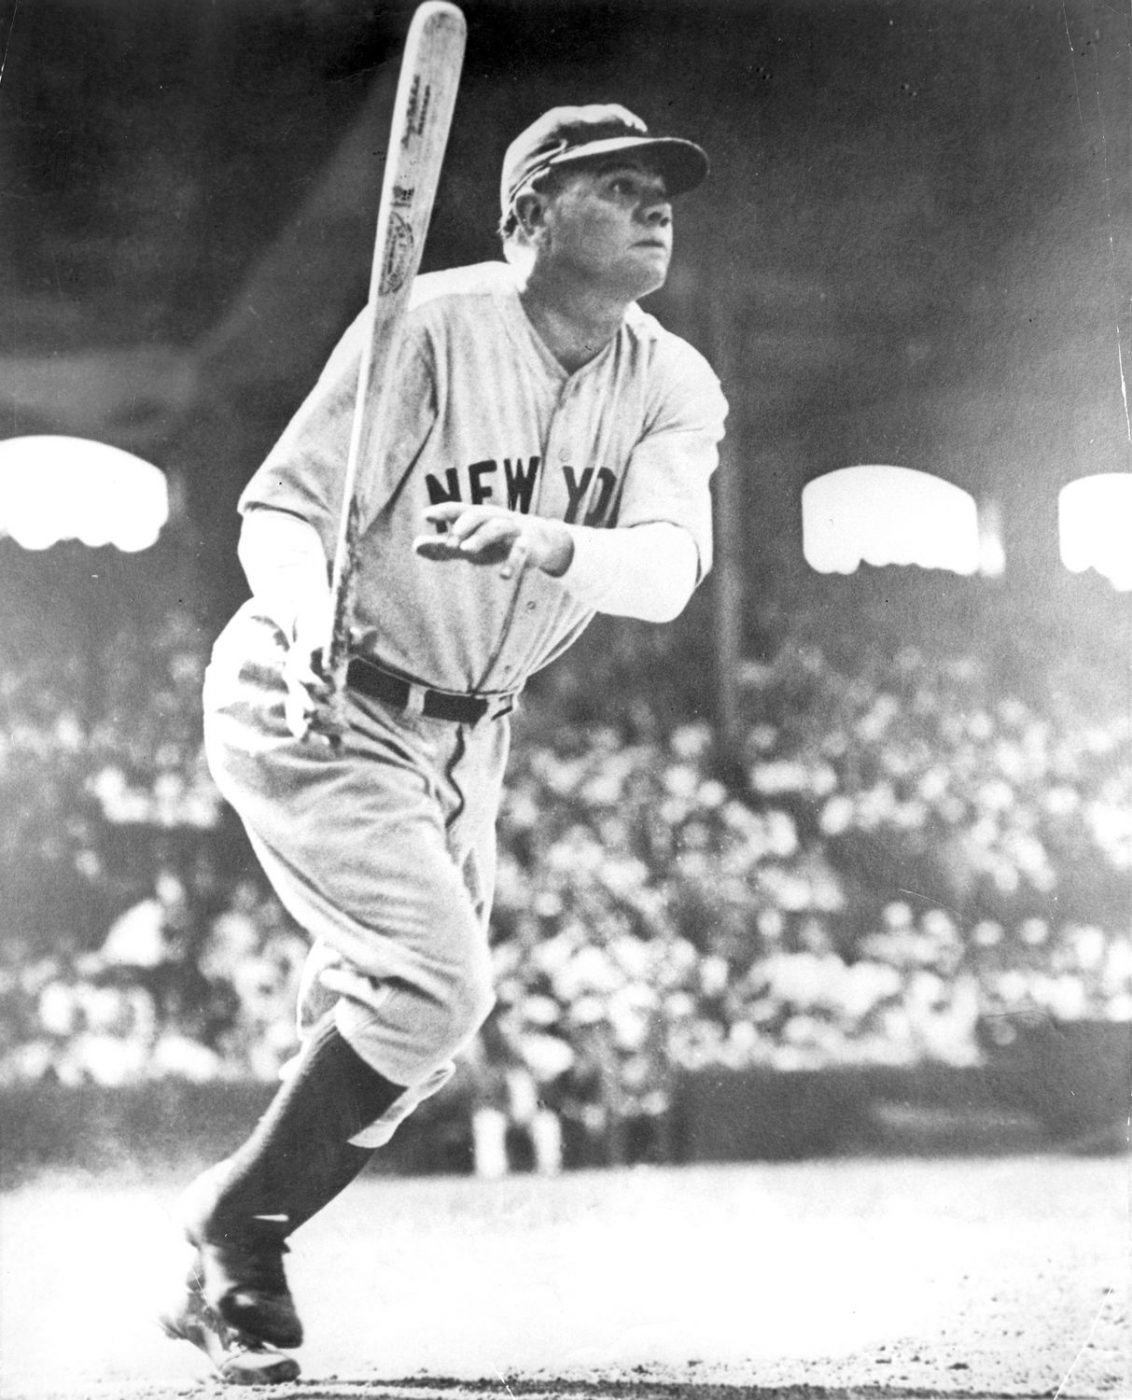 What was the nickname given to Babe Ruth?